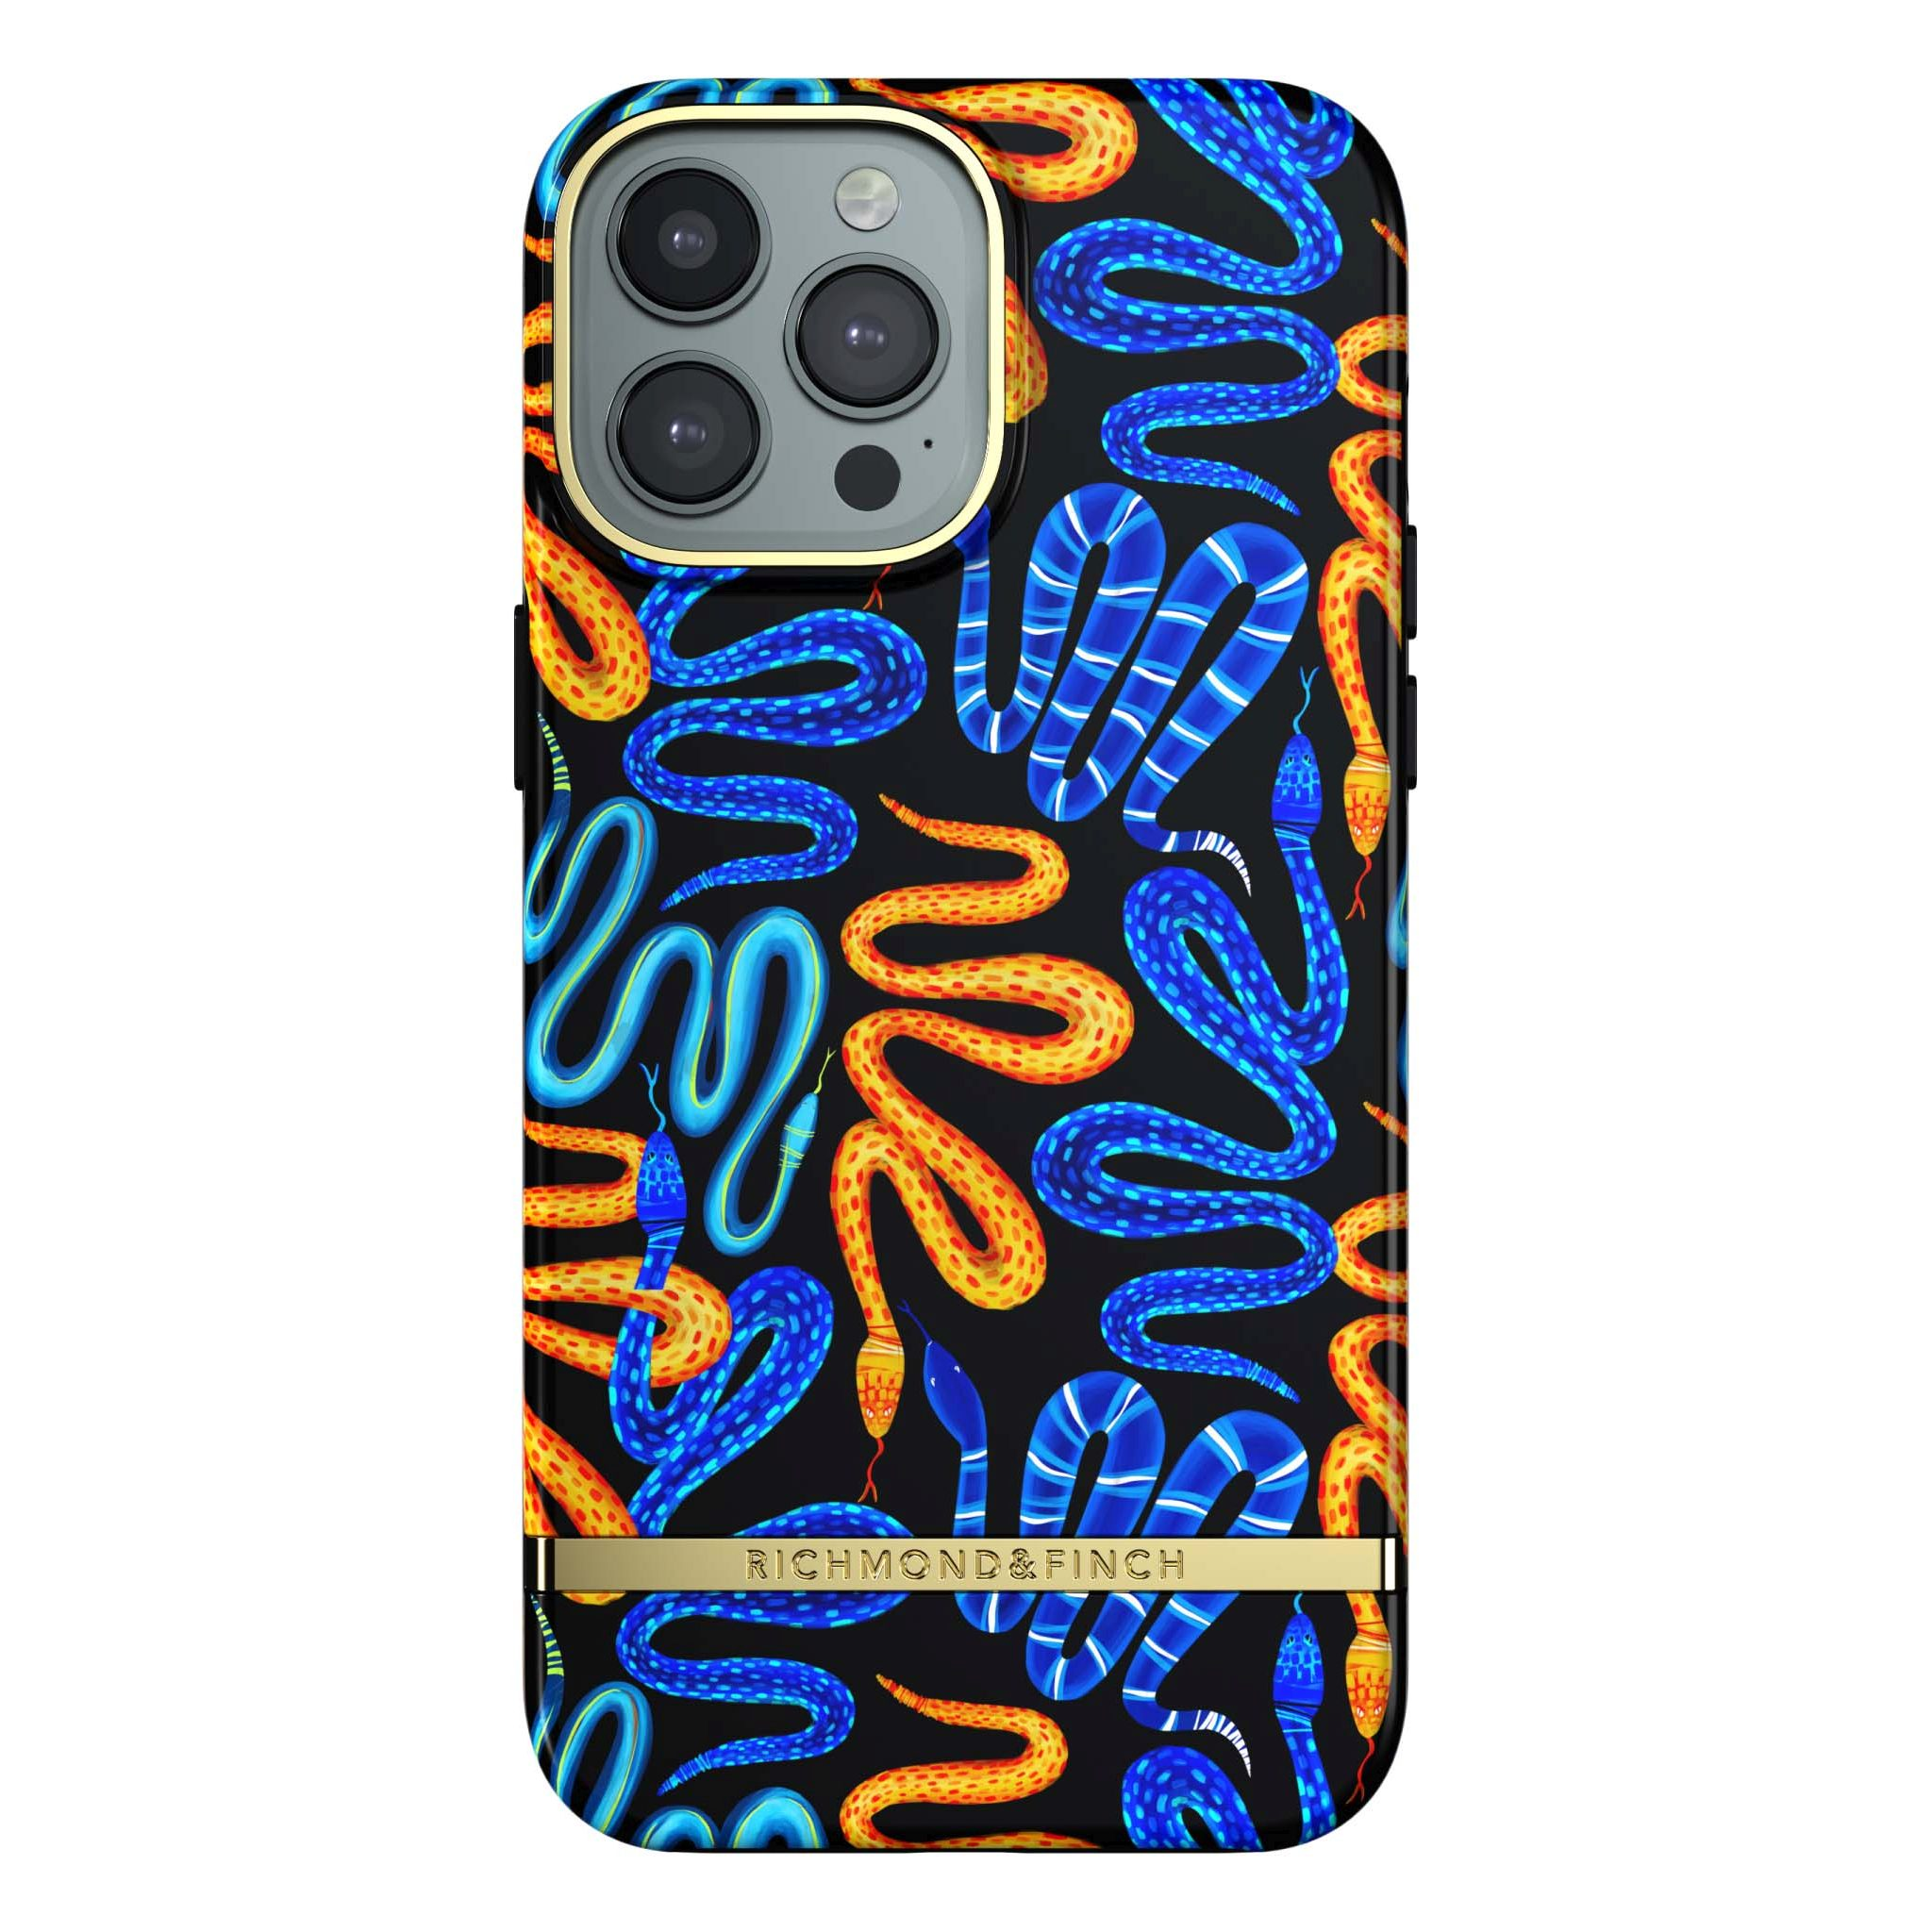 PRO IPHONE 13 Backcover, Pit, & APPLE, COLOURFUL FINCH MAX, Snake RICHMOND